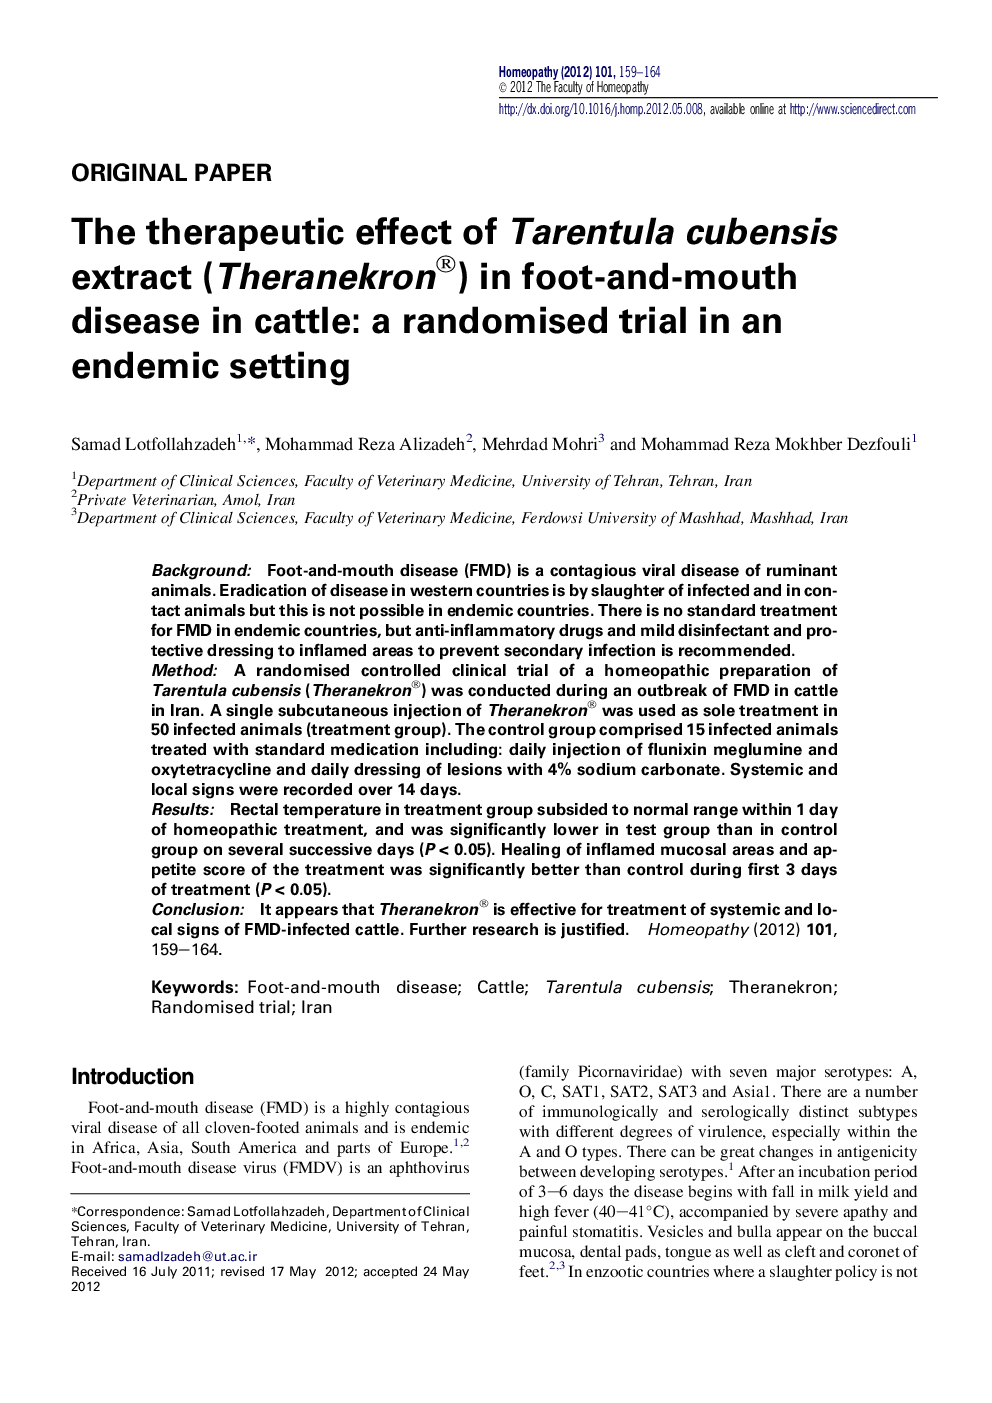 The therapeutic effect of Tarentula cubensis extract (Theranekron®) in foot-and-mouth disease in cattle: a randomised trial in an endemic setting